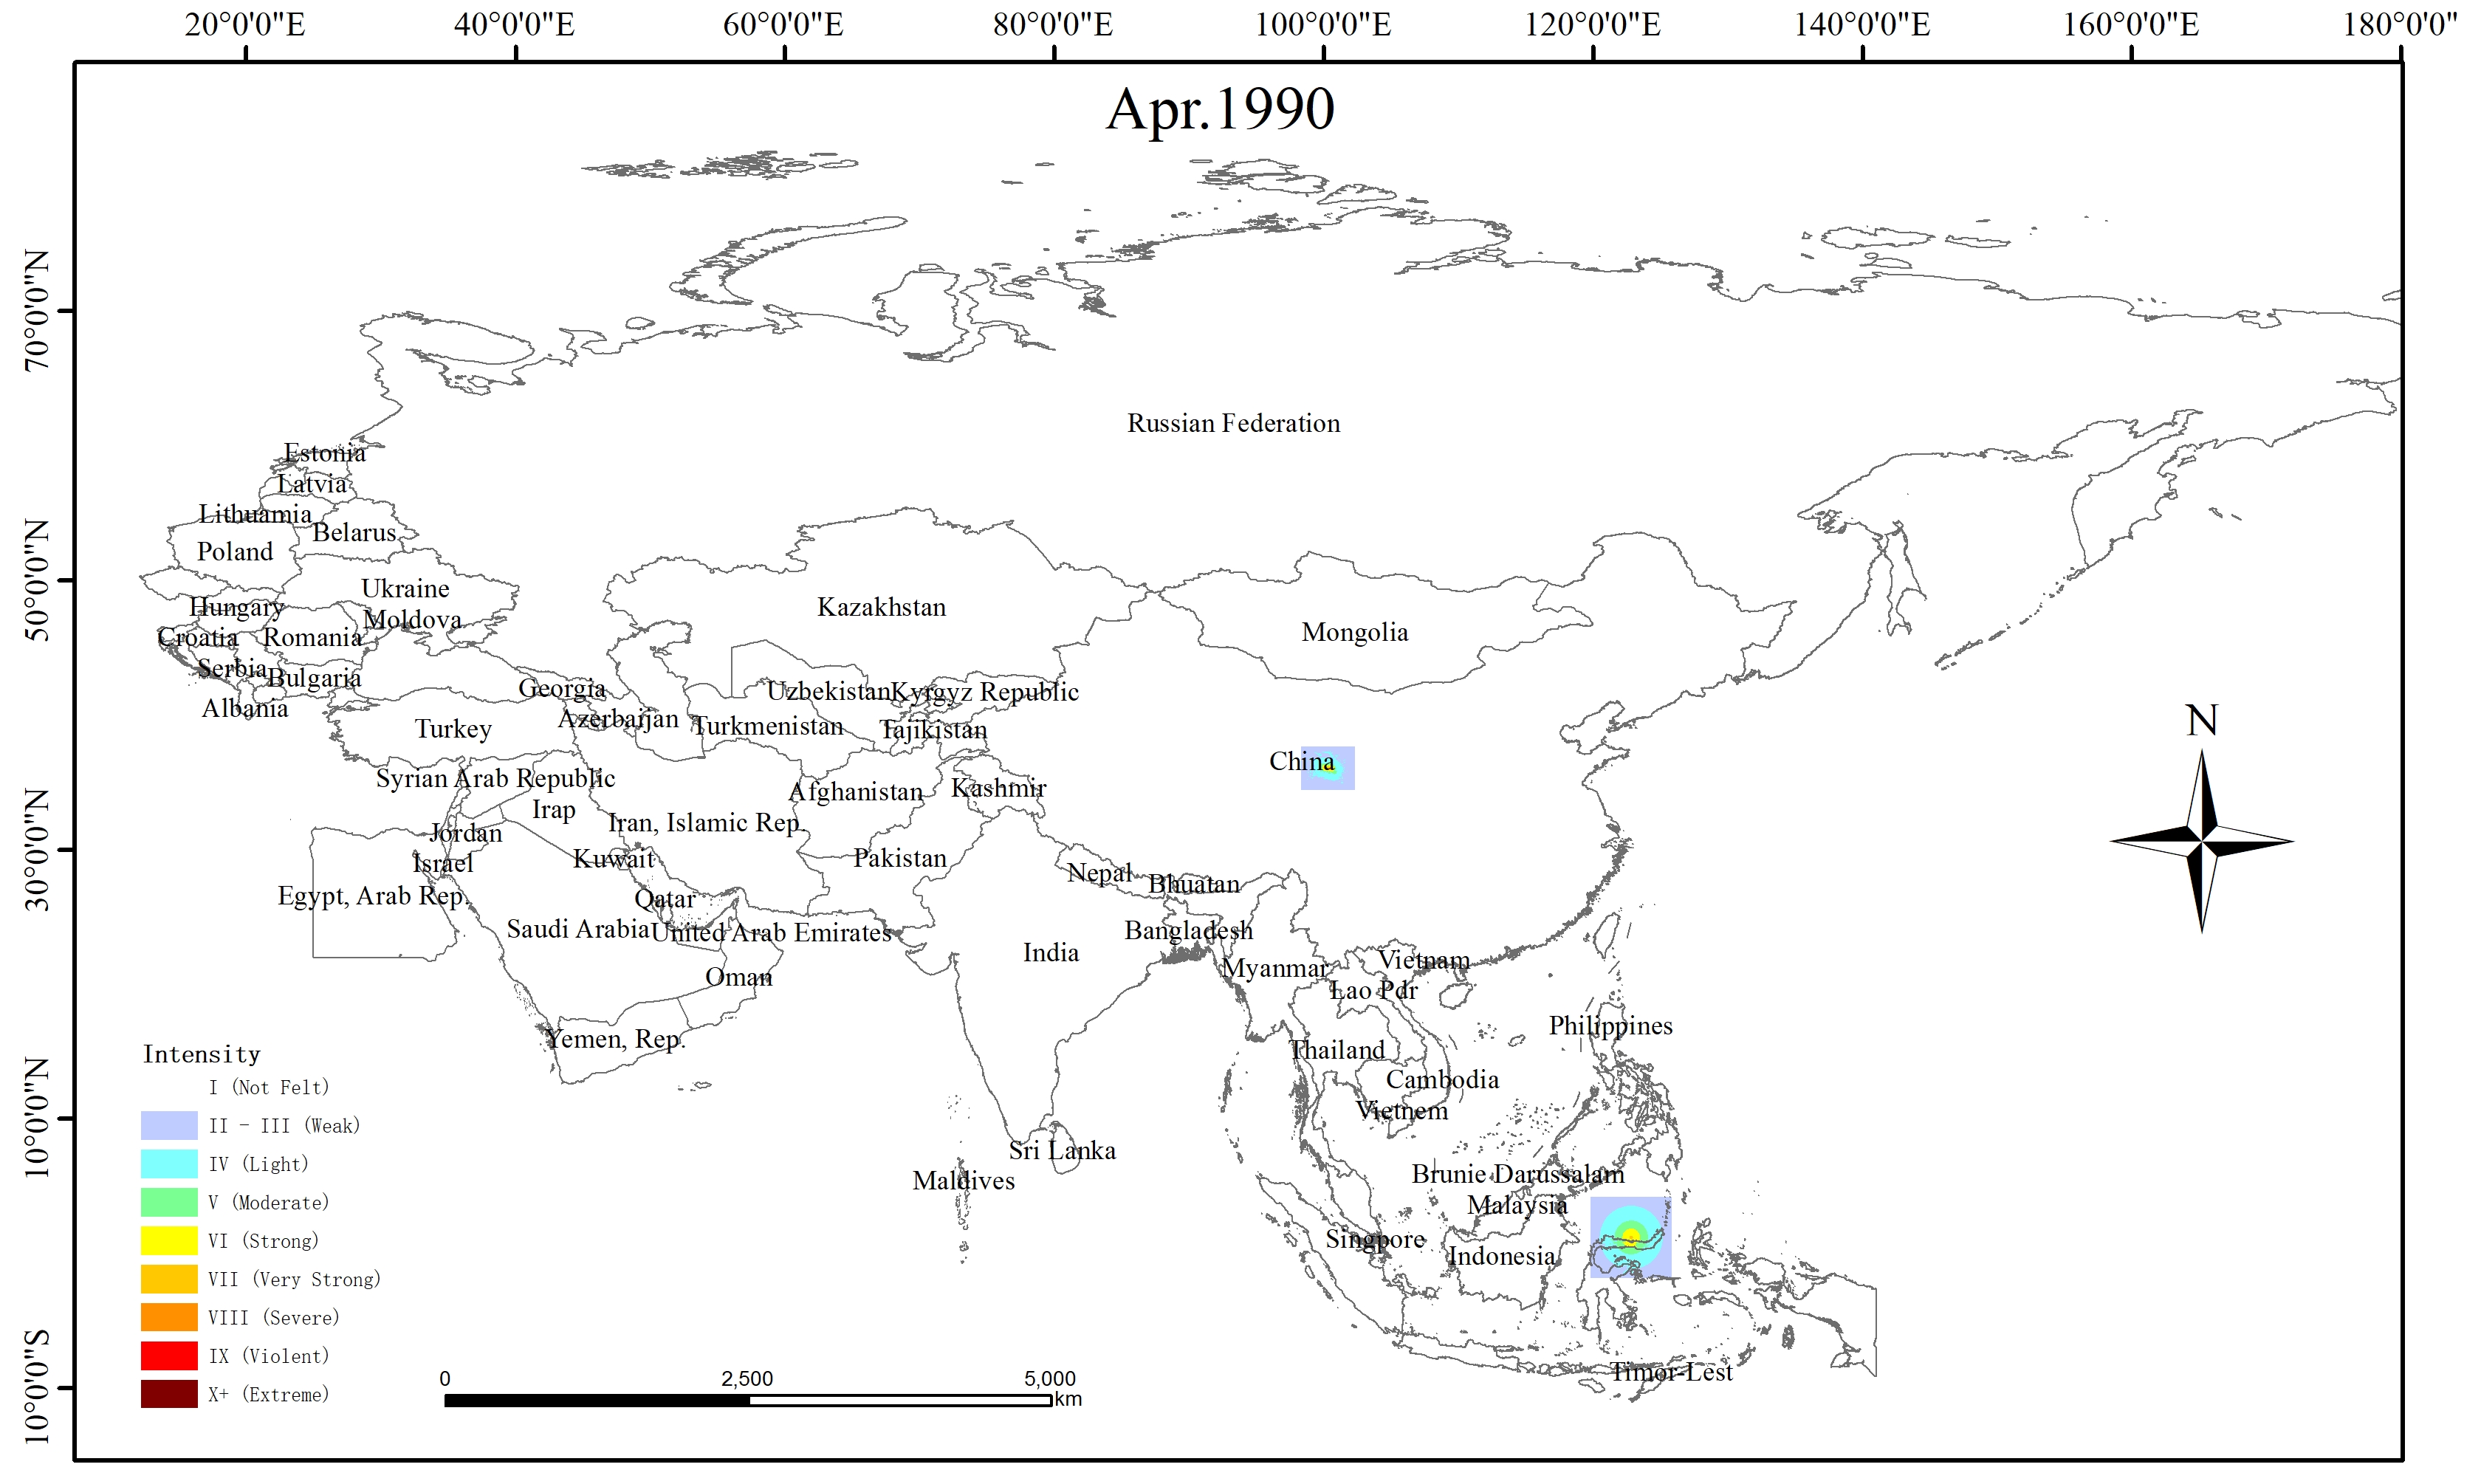 Spatio-temporal Distribution of Earthquake Disaster in the Belt and Road Area in 1990